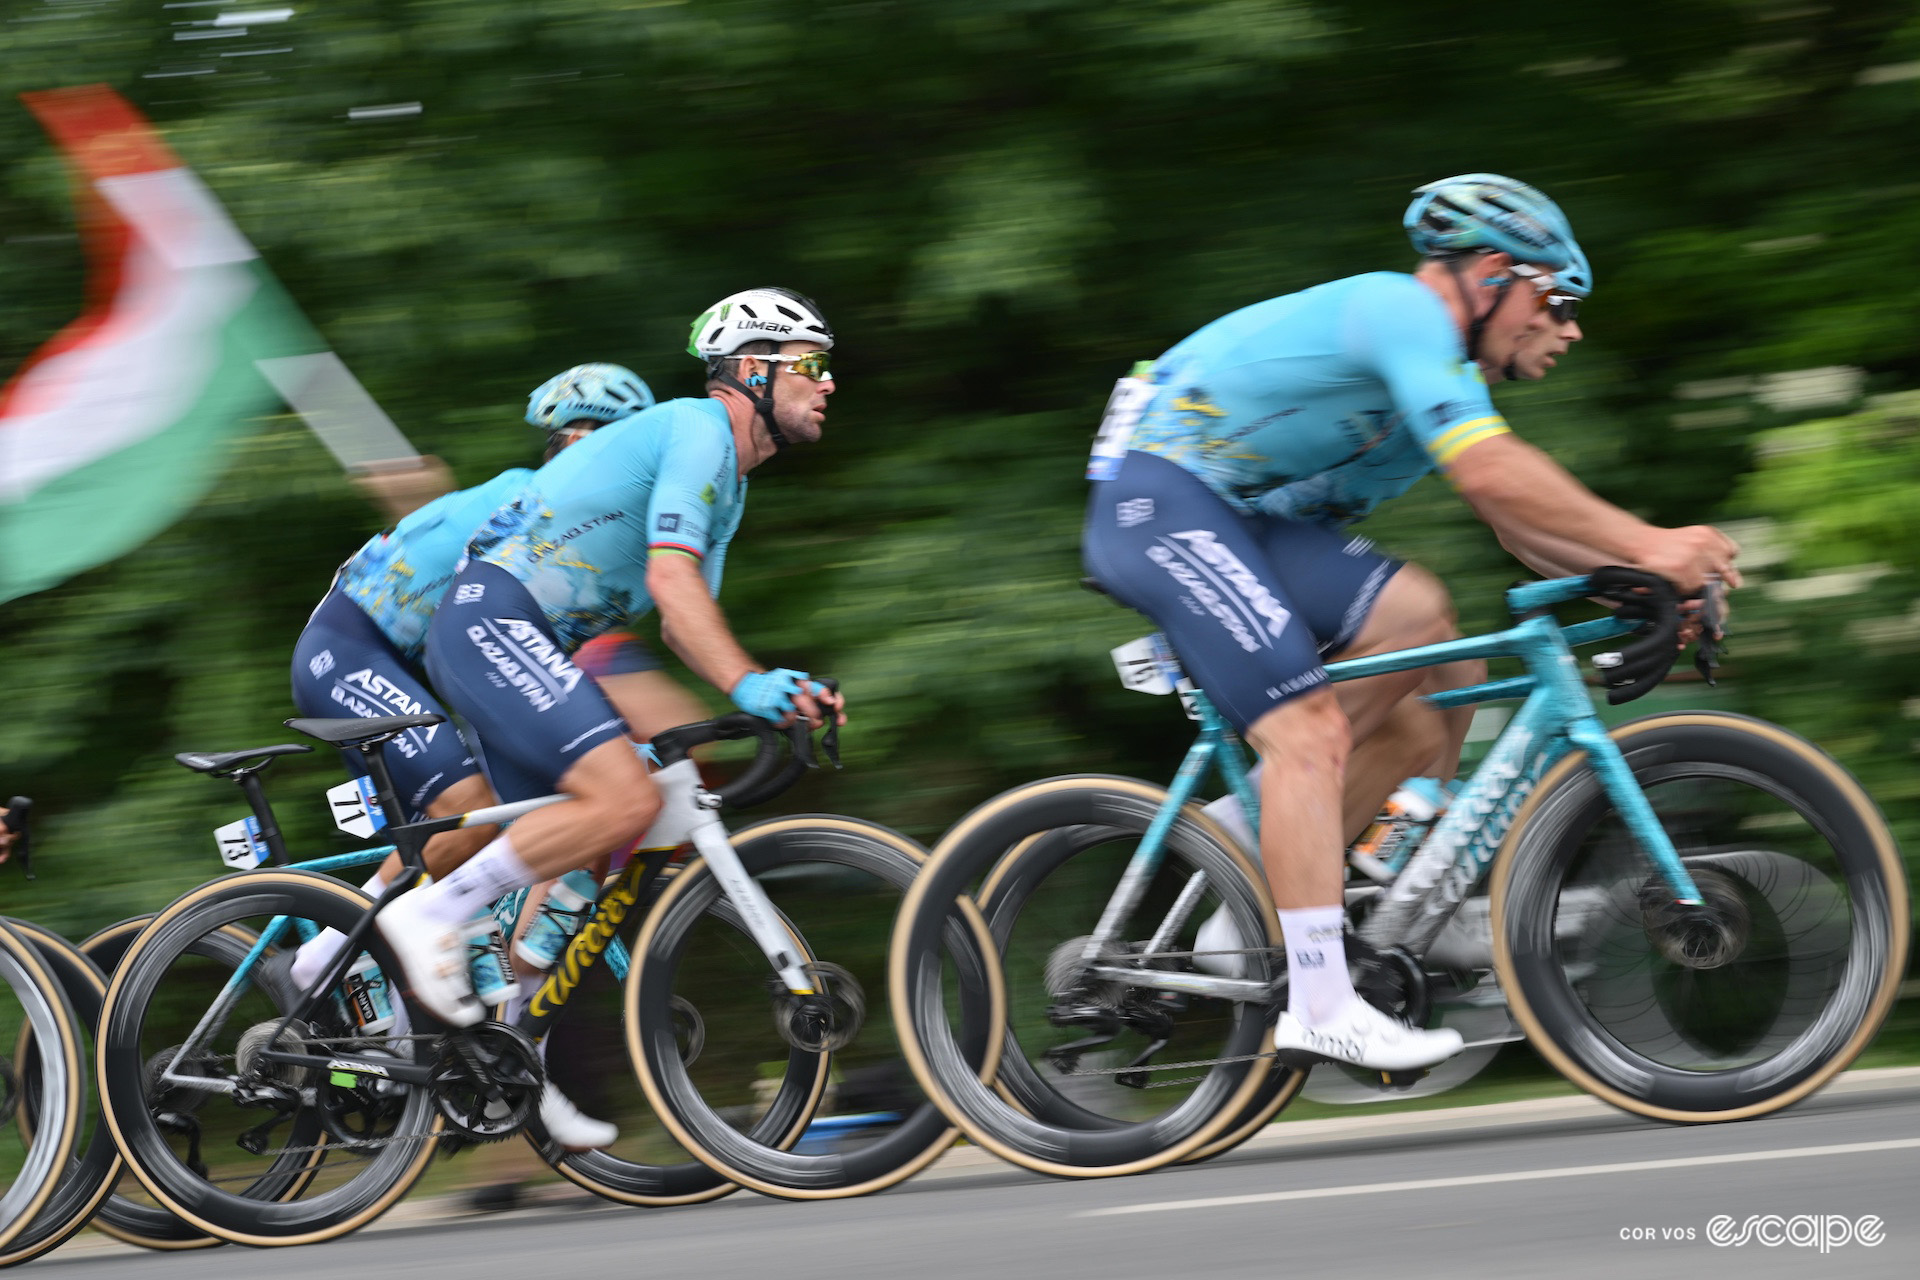 A side view of Mark Cavendish riding among his Astana Qazaqstan teammates during the Tour of Hungary, an out of focus Hungarian flag flying in the background.